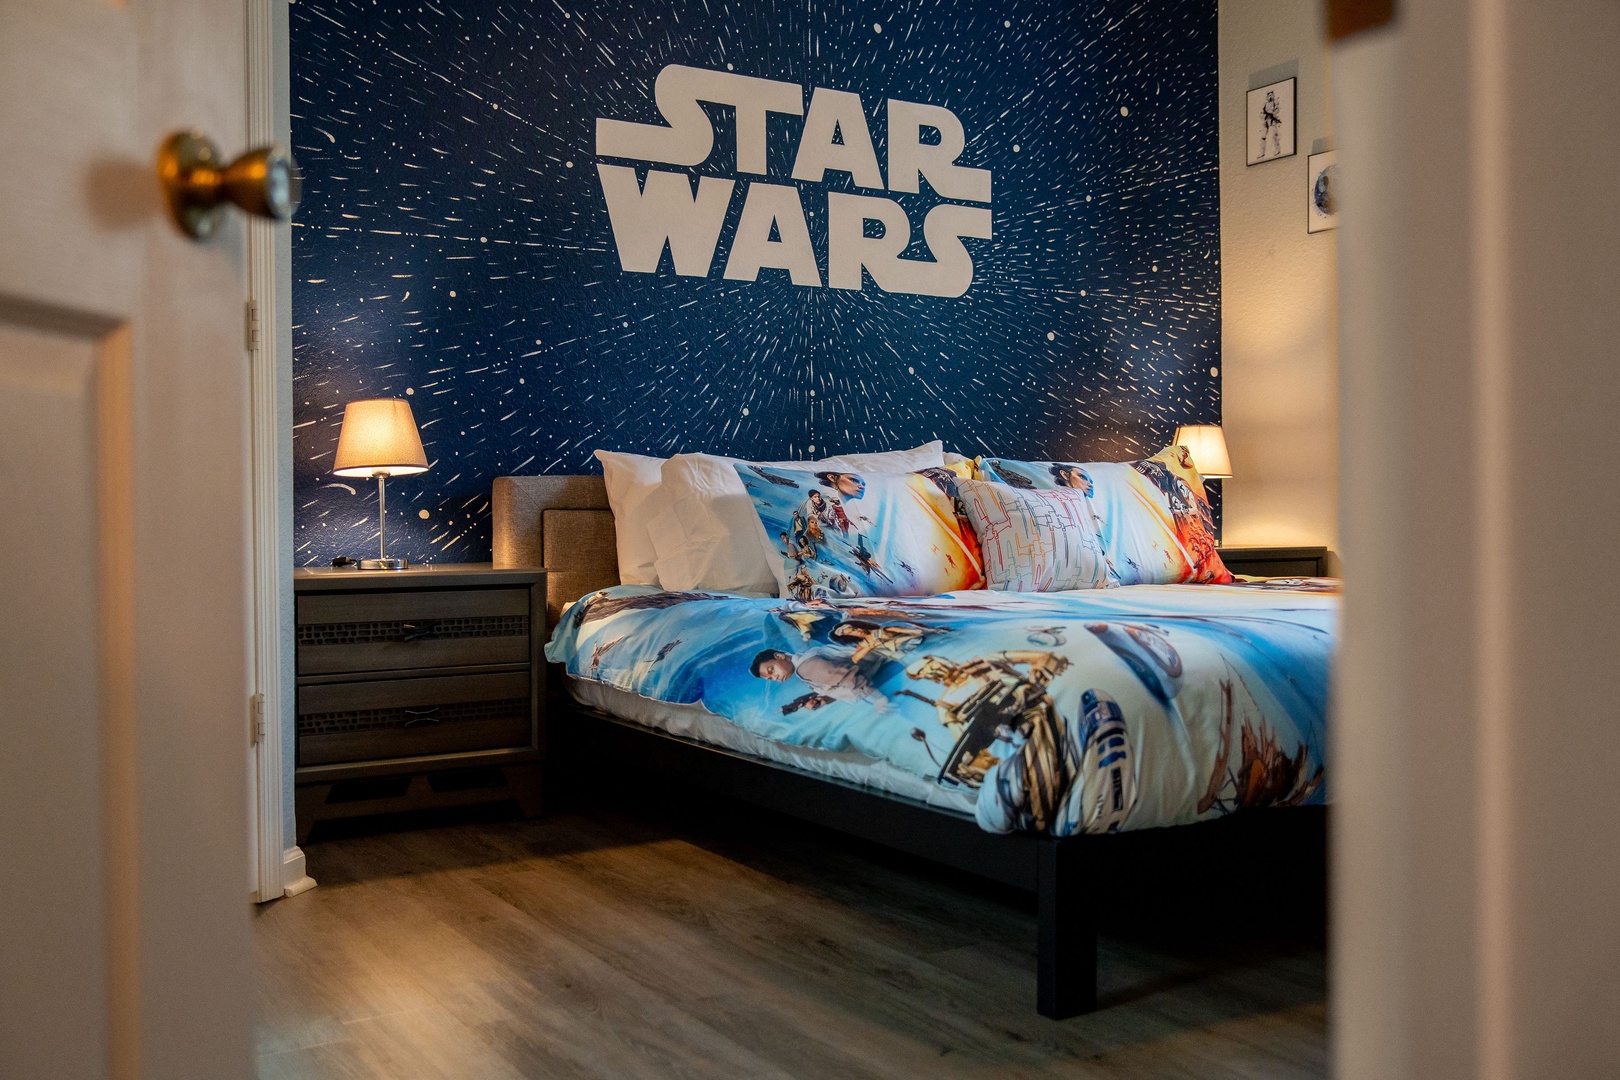 "May the Force be with you" Star Wars themed room with king bed, TV, and ensuite